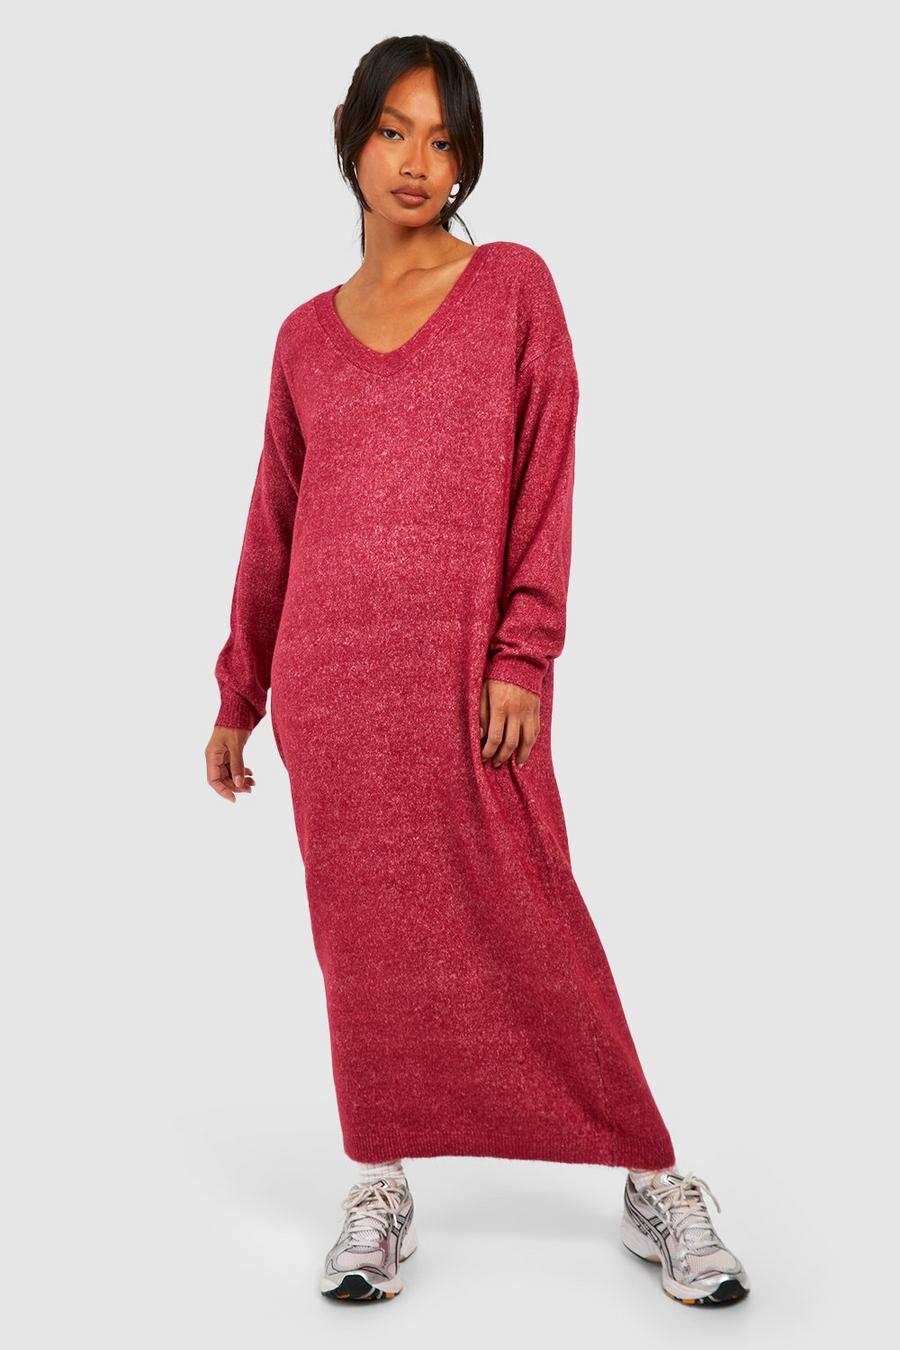 Raspberry Slouchy Soft Knit Maxi Knitted Dress